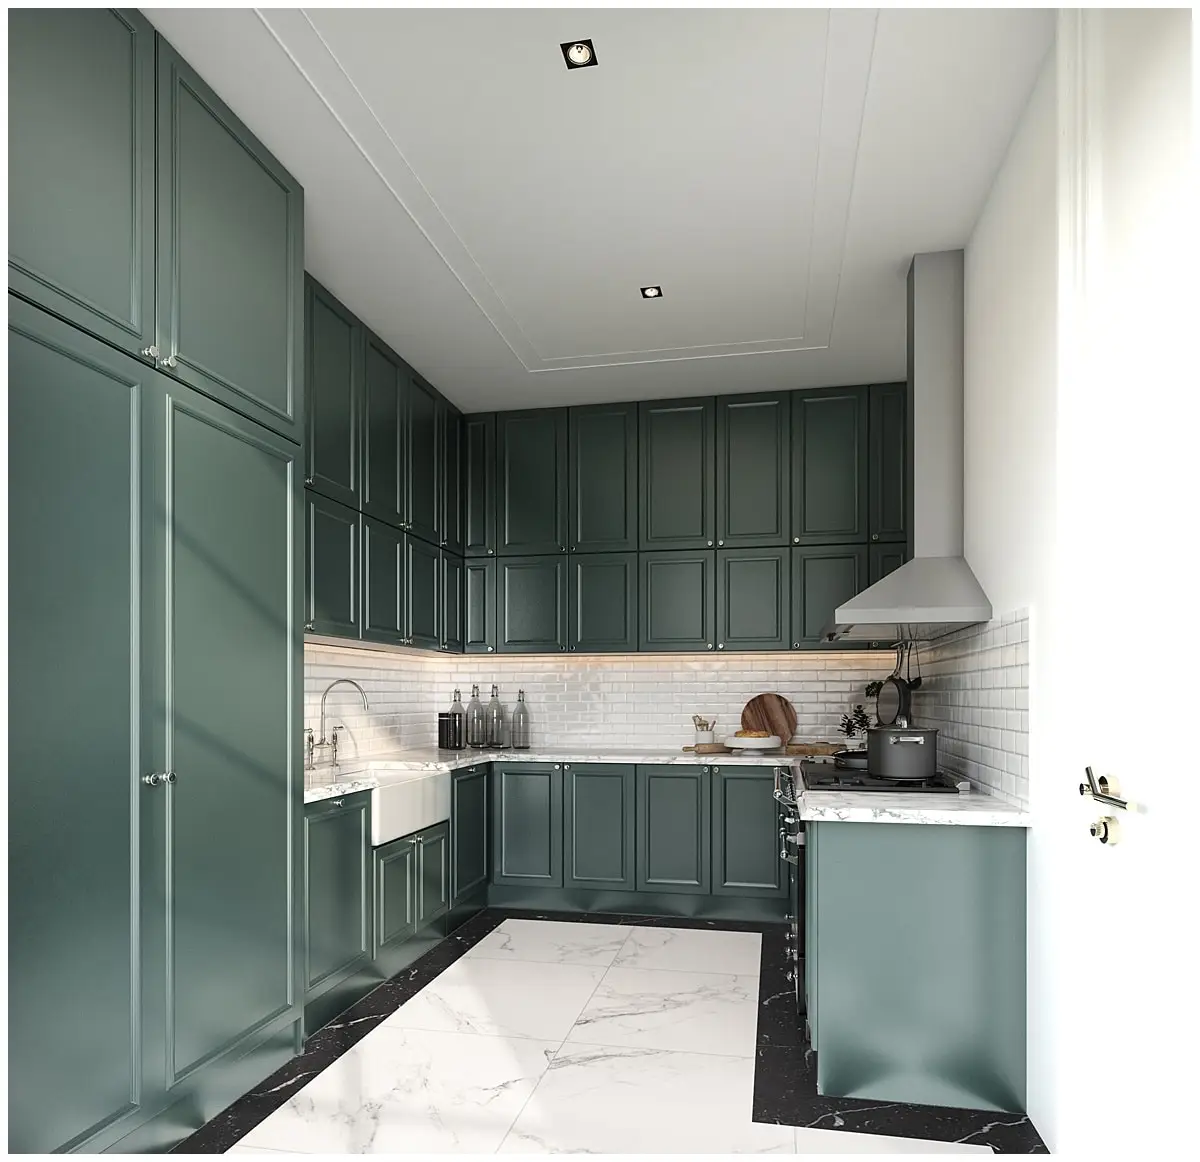 The Tones and Hues of Green Kitchen Cabinets | WPL Interior Design